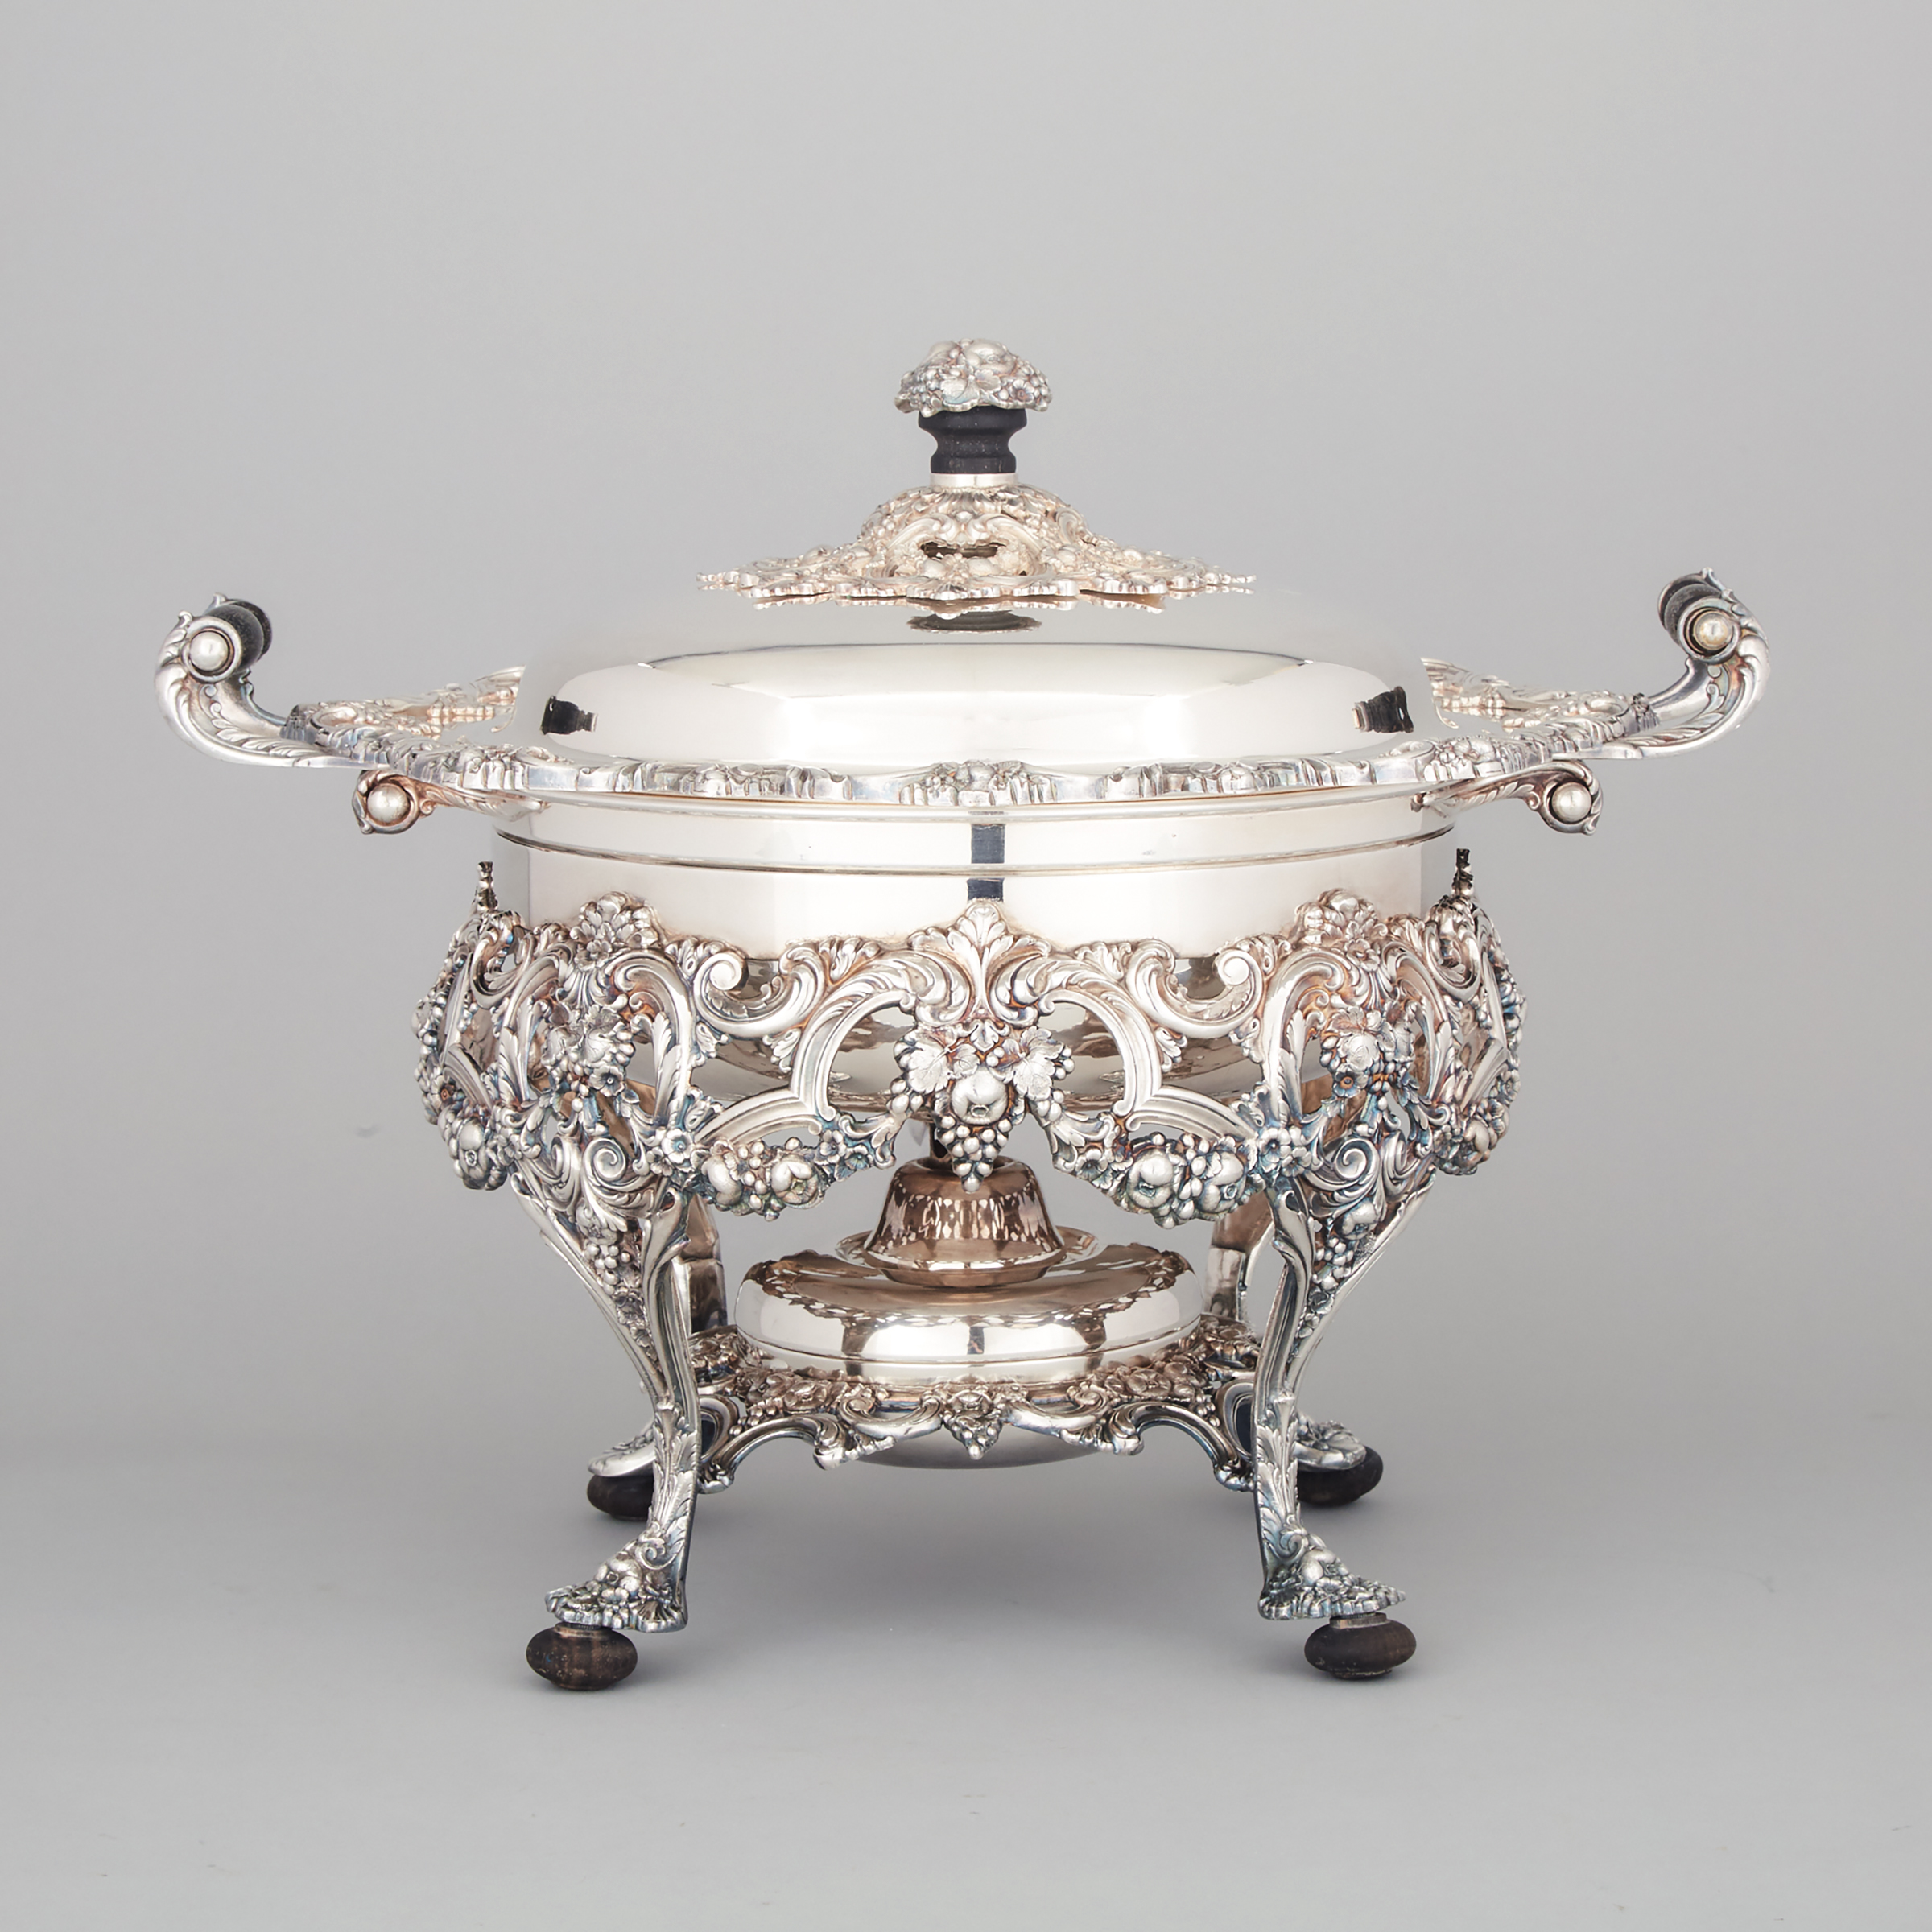 American Silver Plated Large Covered Serving Dish on Warming Stand, International Silver Co., 20th century